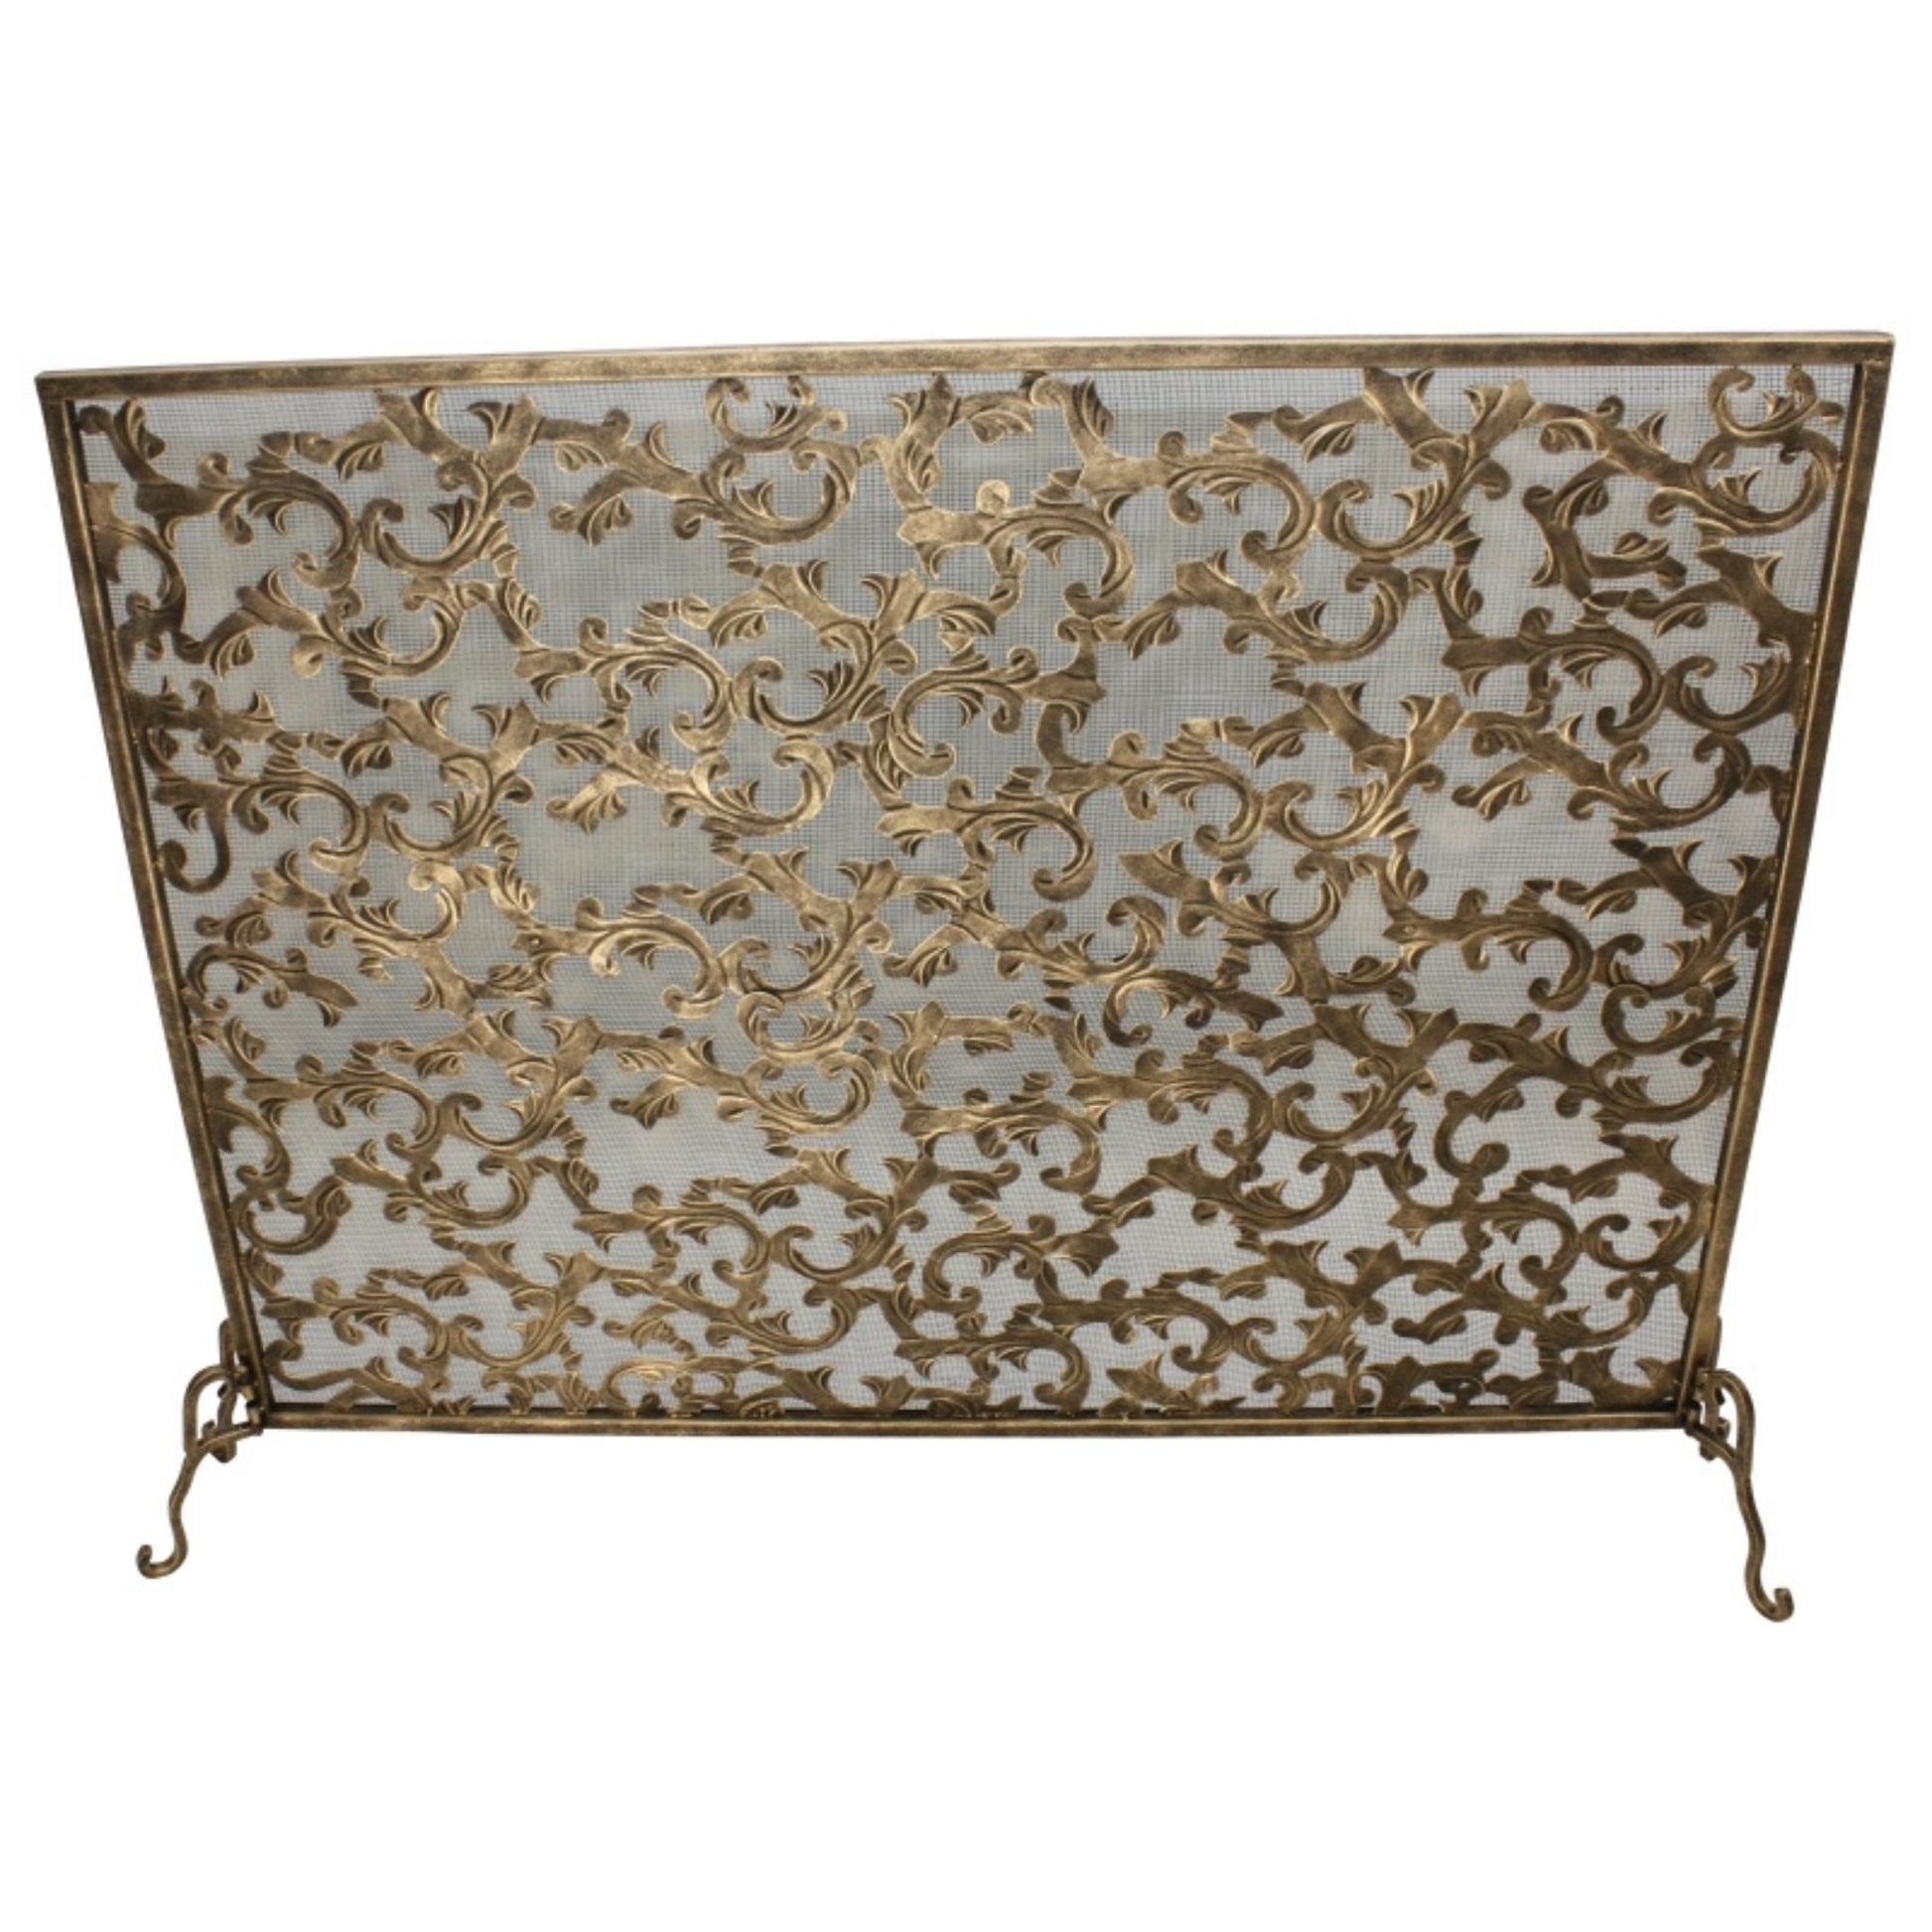 Acanthus Leaf Design Fire Screen - Fire Hearth Single Straight Panel Screen with Mesh | InsideOutCatalog.com